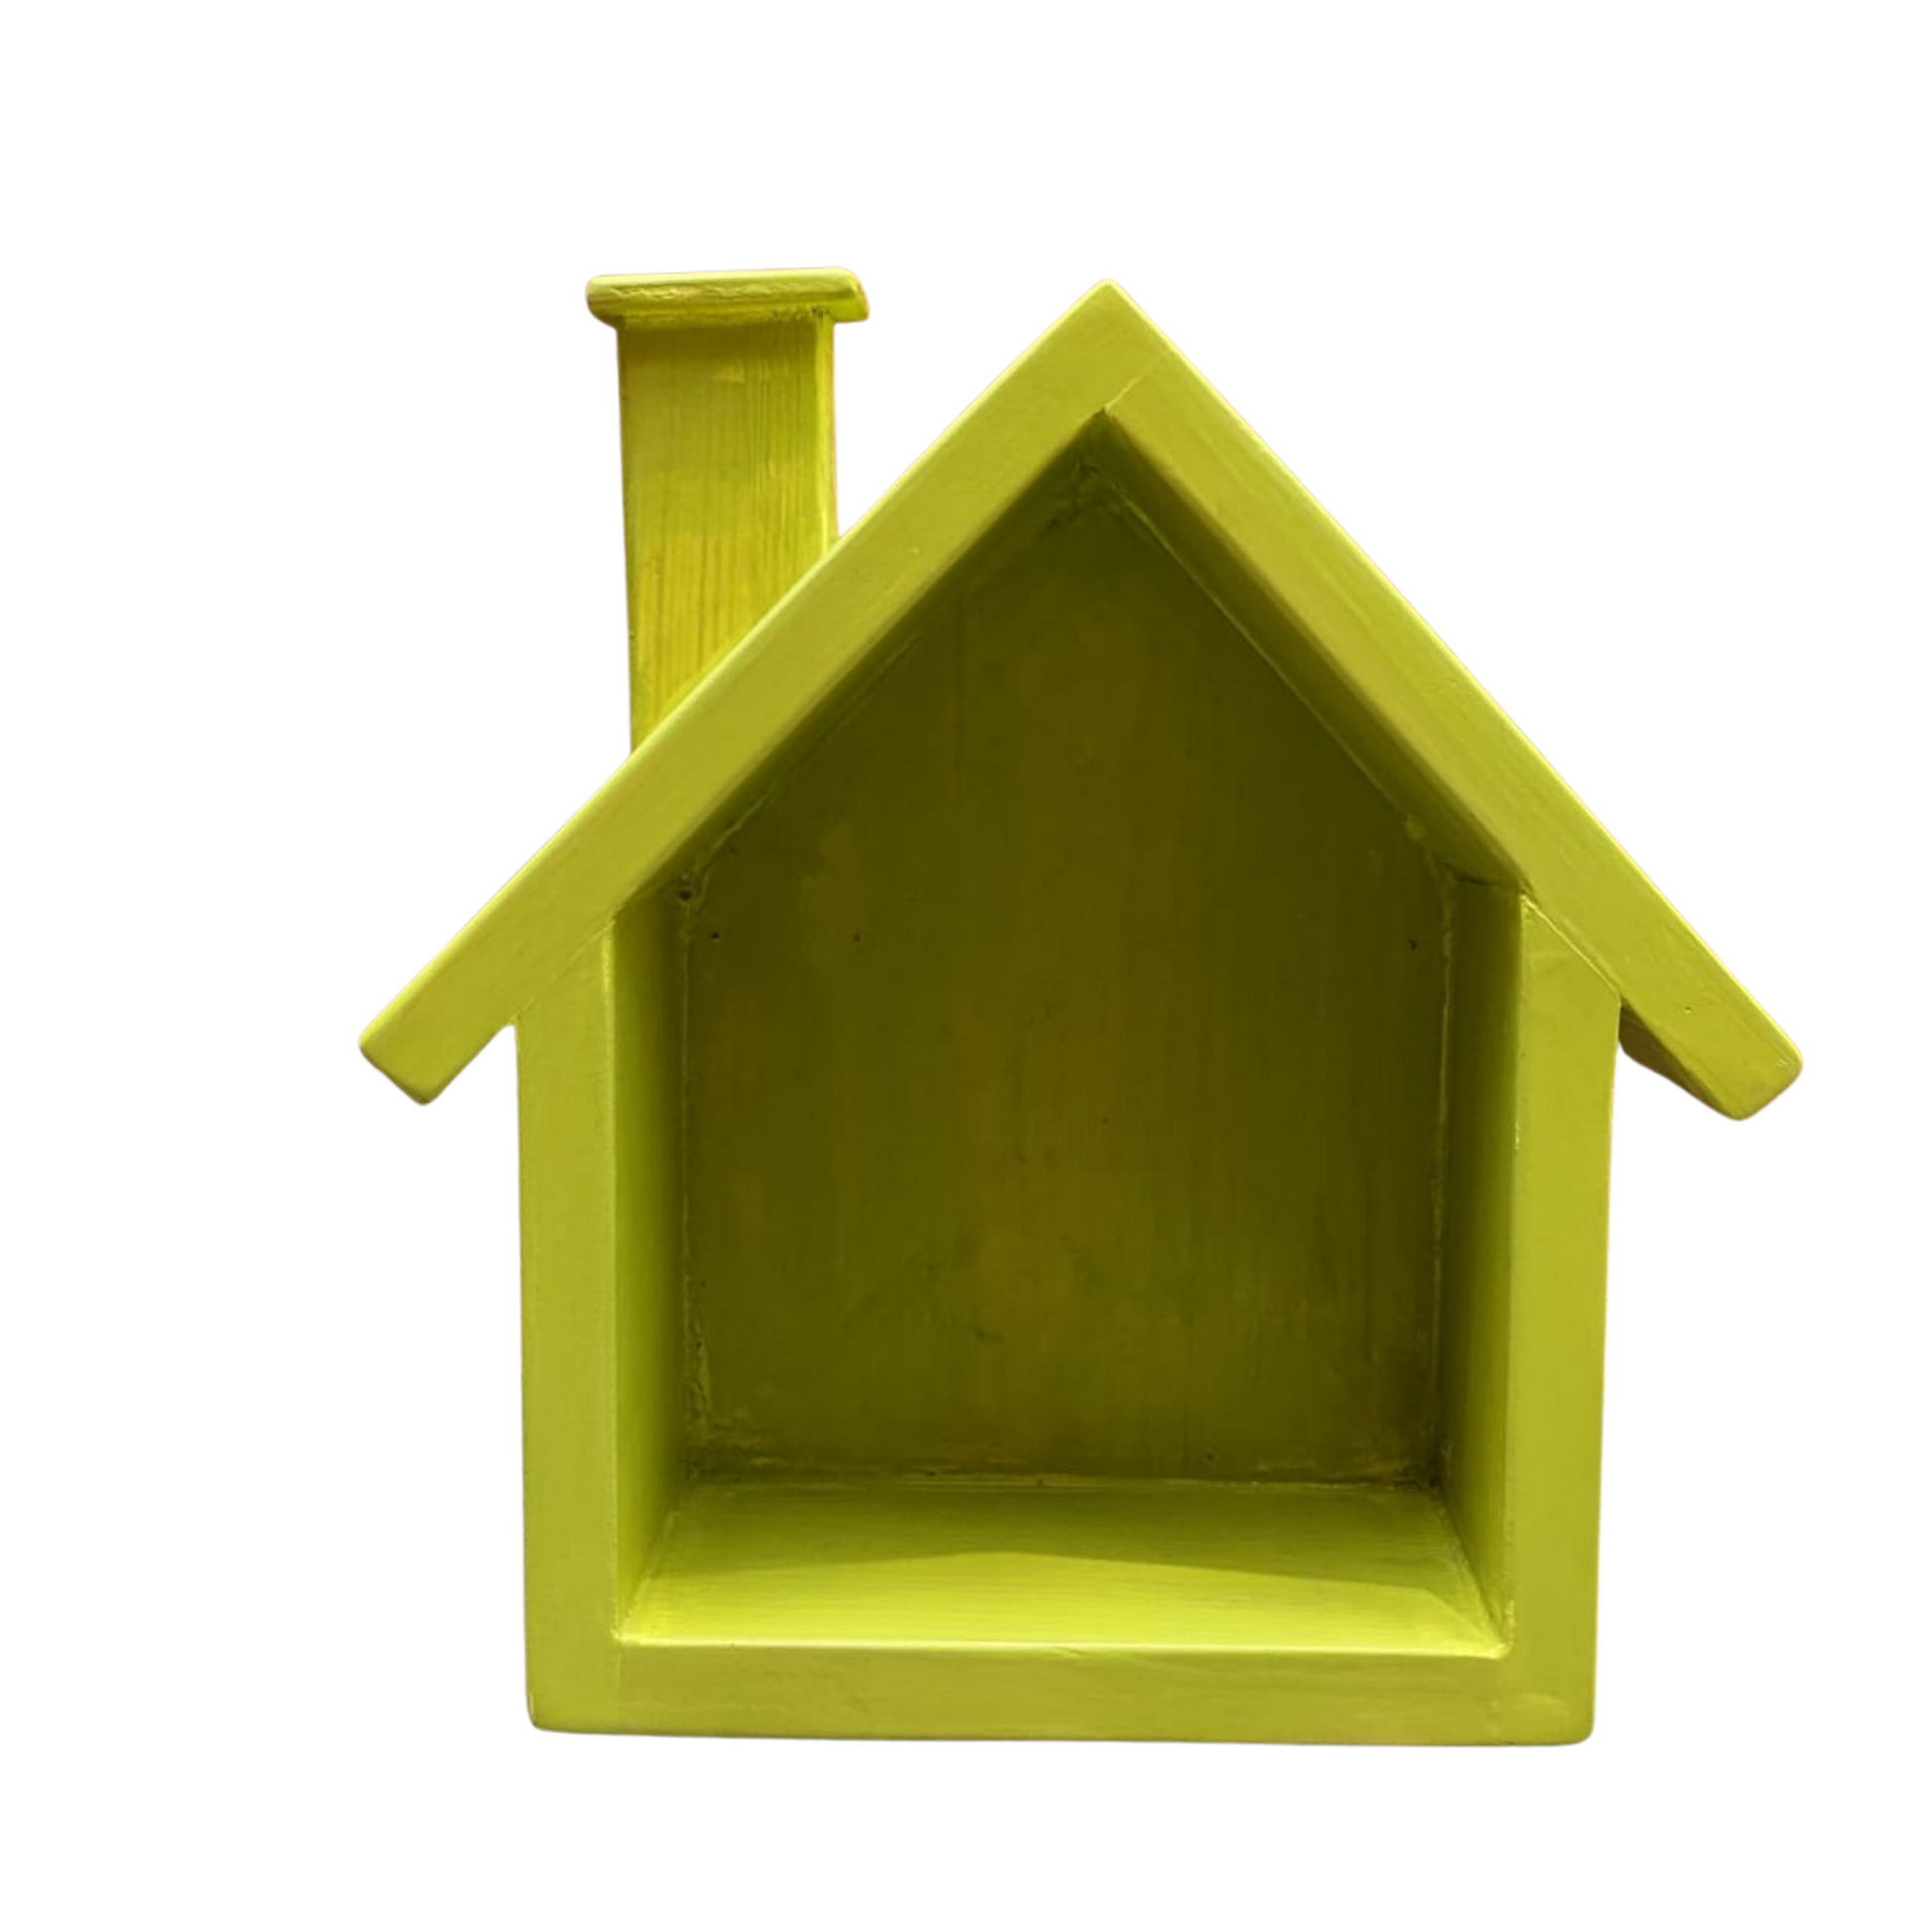 CustHum-Small house shaped wooden decor-light green (front view)